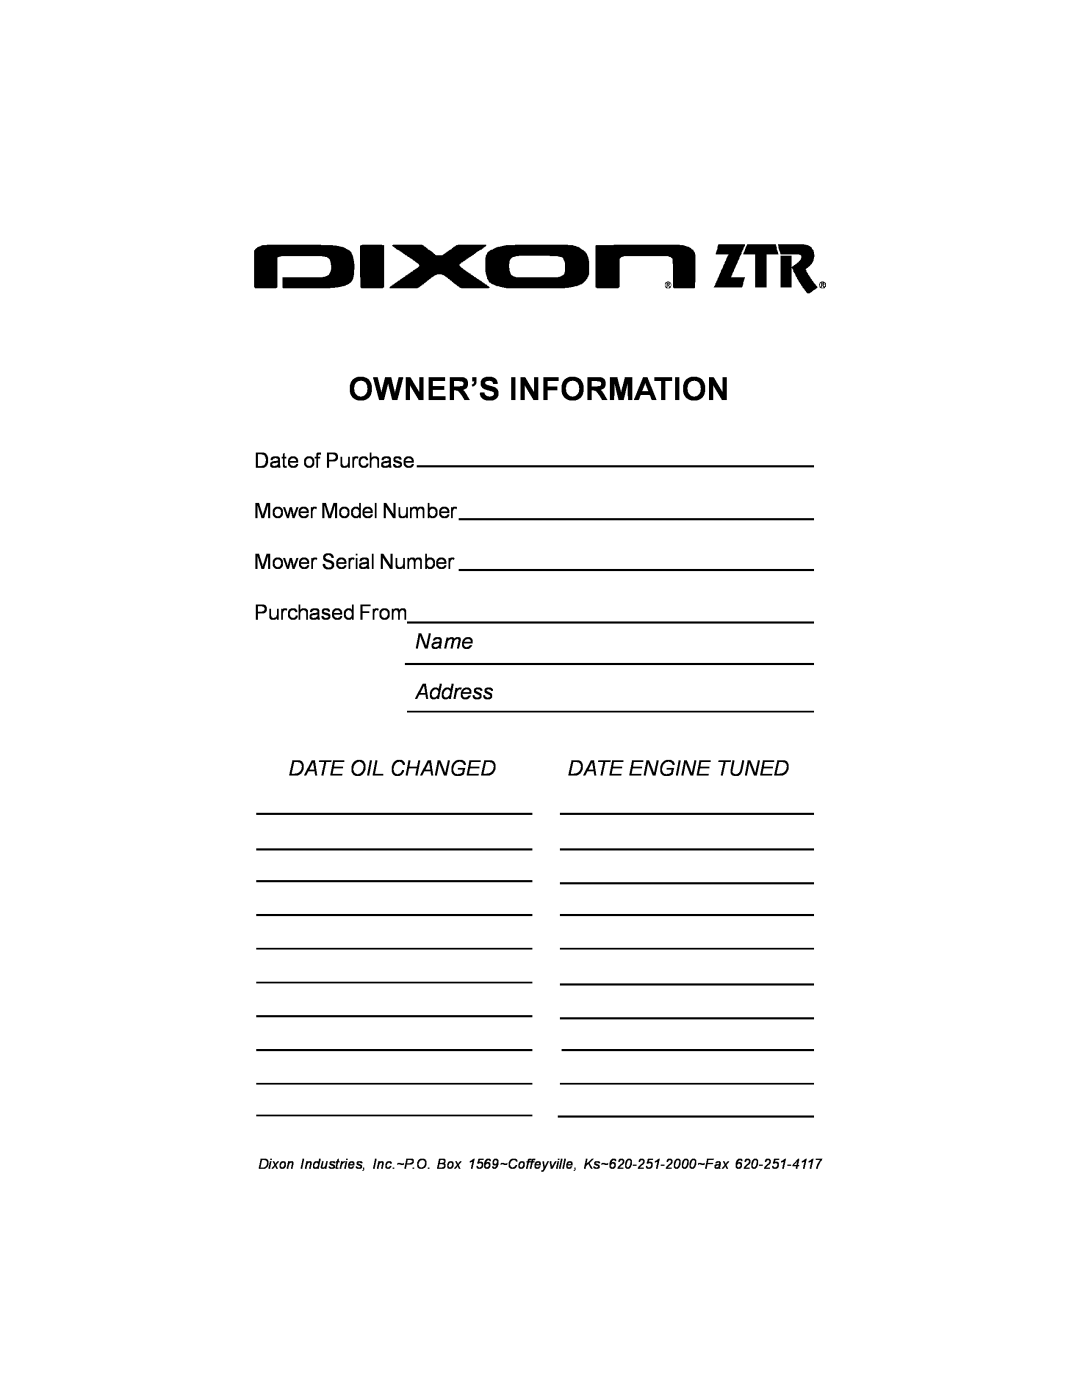 Dixon ELS 60 manual Owner’S Information, Name Address, Date Oil Changed, Date Engine Tuned 